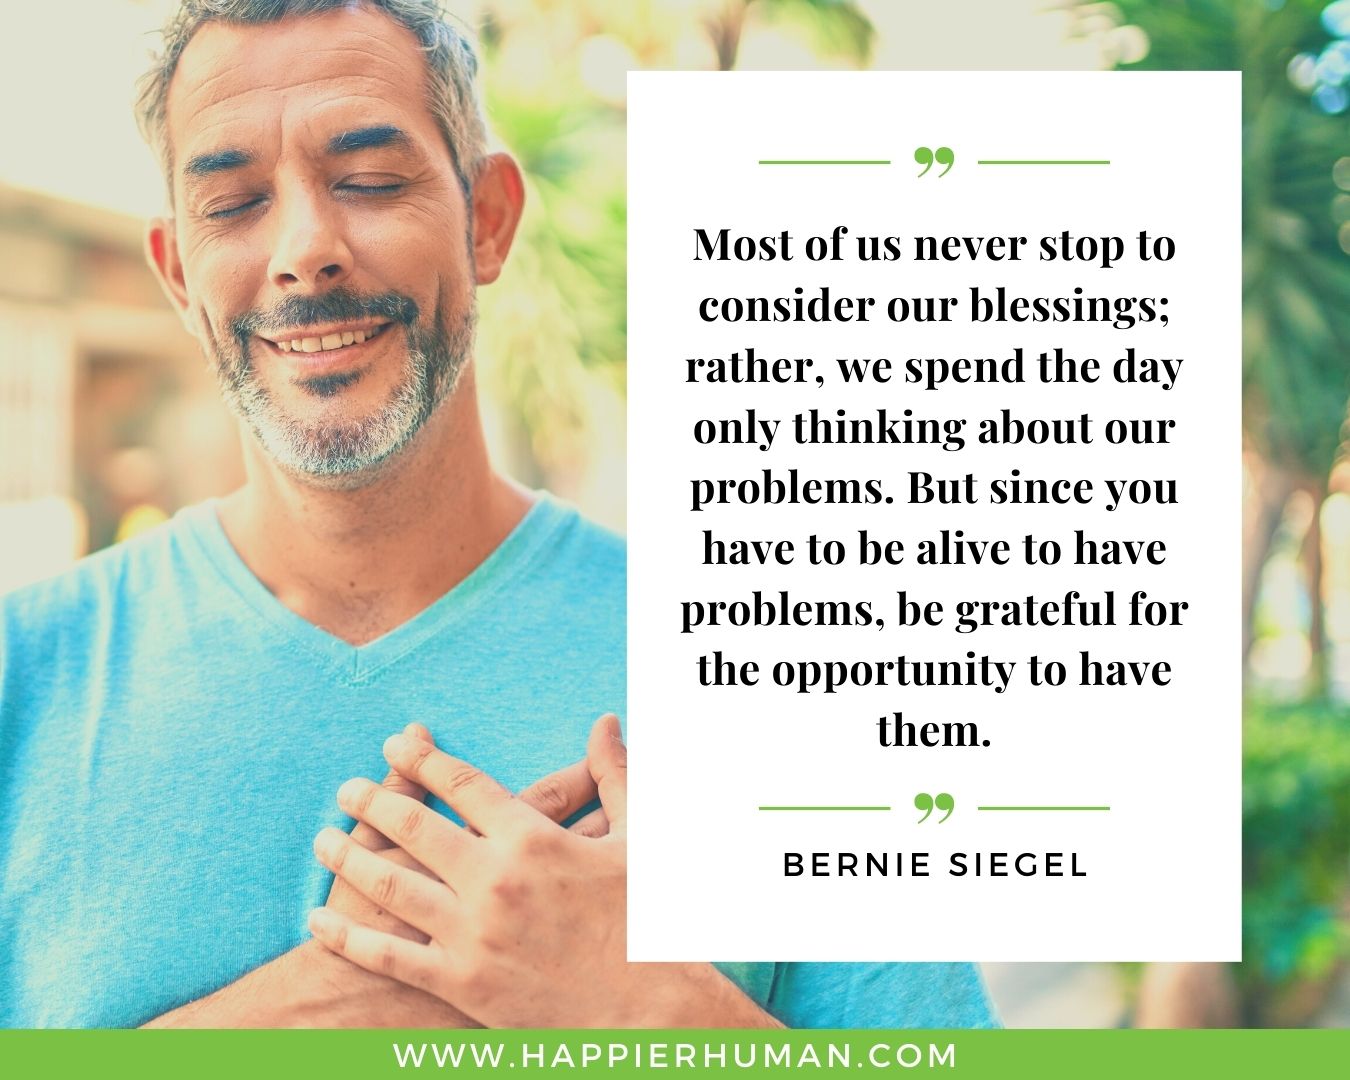 Overthinking Quotes - “Most of us never stop to consider our blessings; rather, we spend the day only thinking about our problems. But since you have to be alive to have problems, be grateful for the opportunity to have them.” - Bernie Siegel